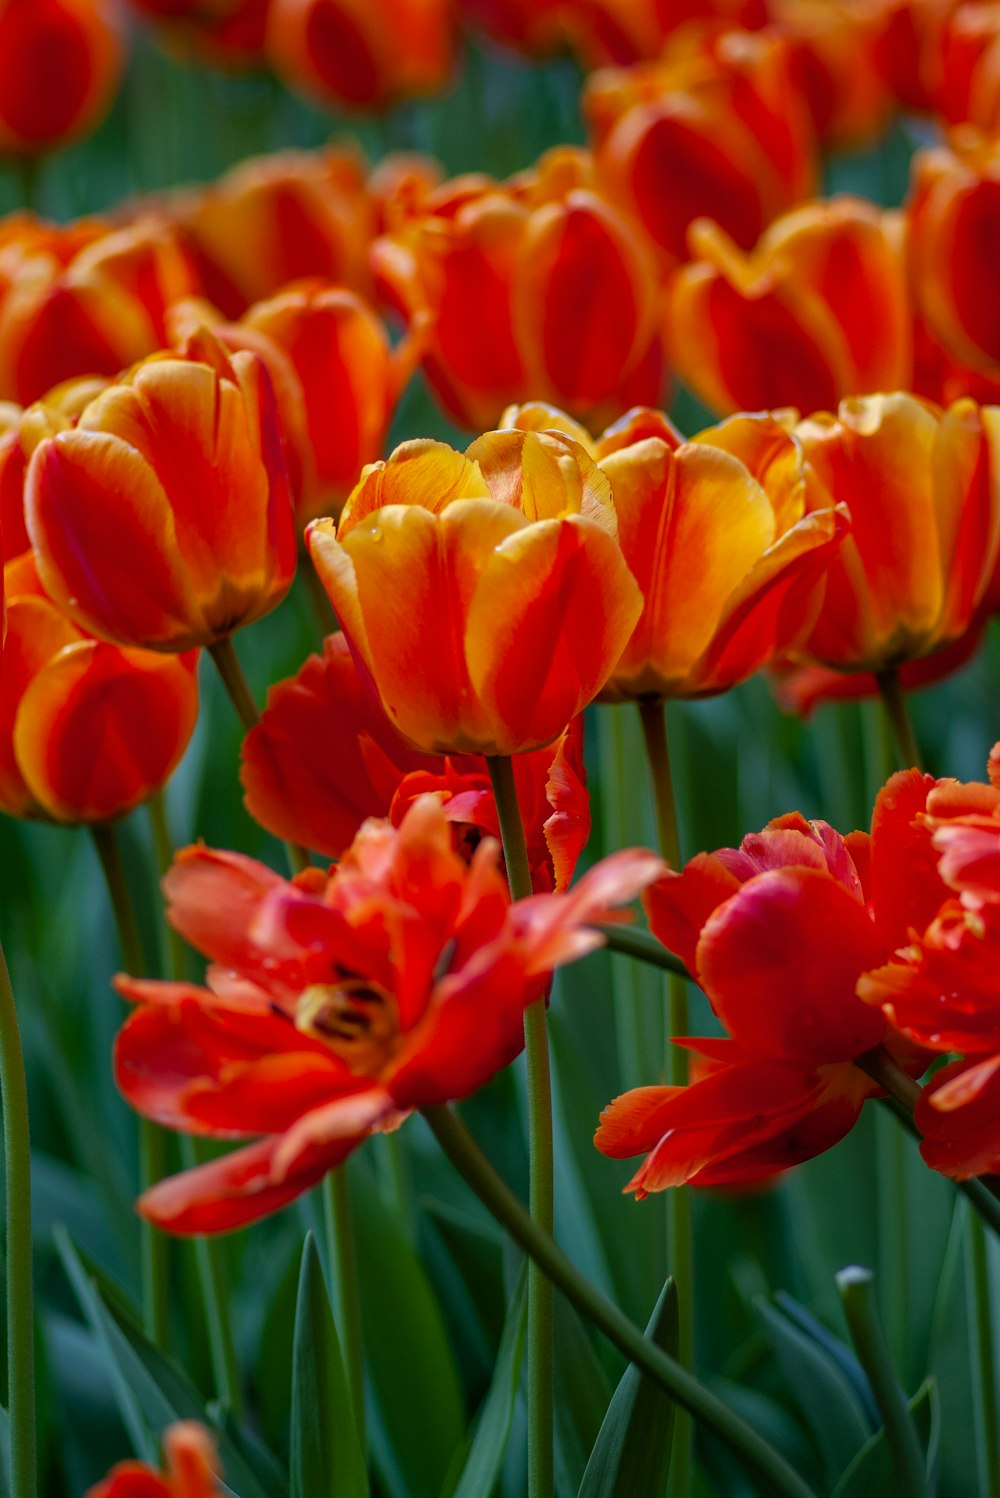 red-and-yellow petaled flowes